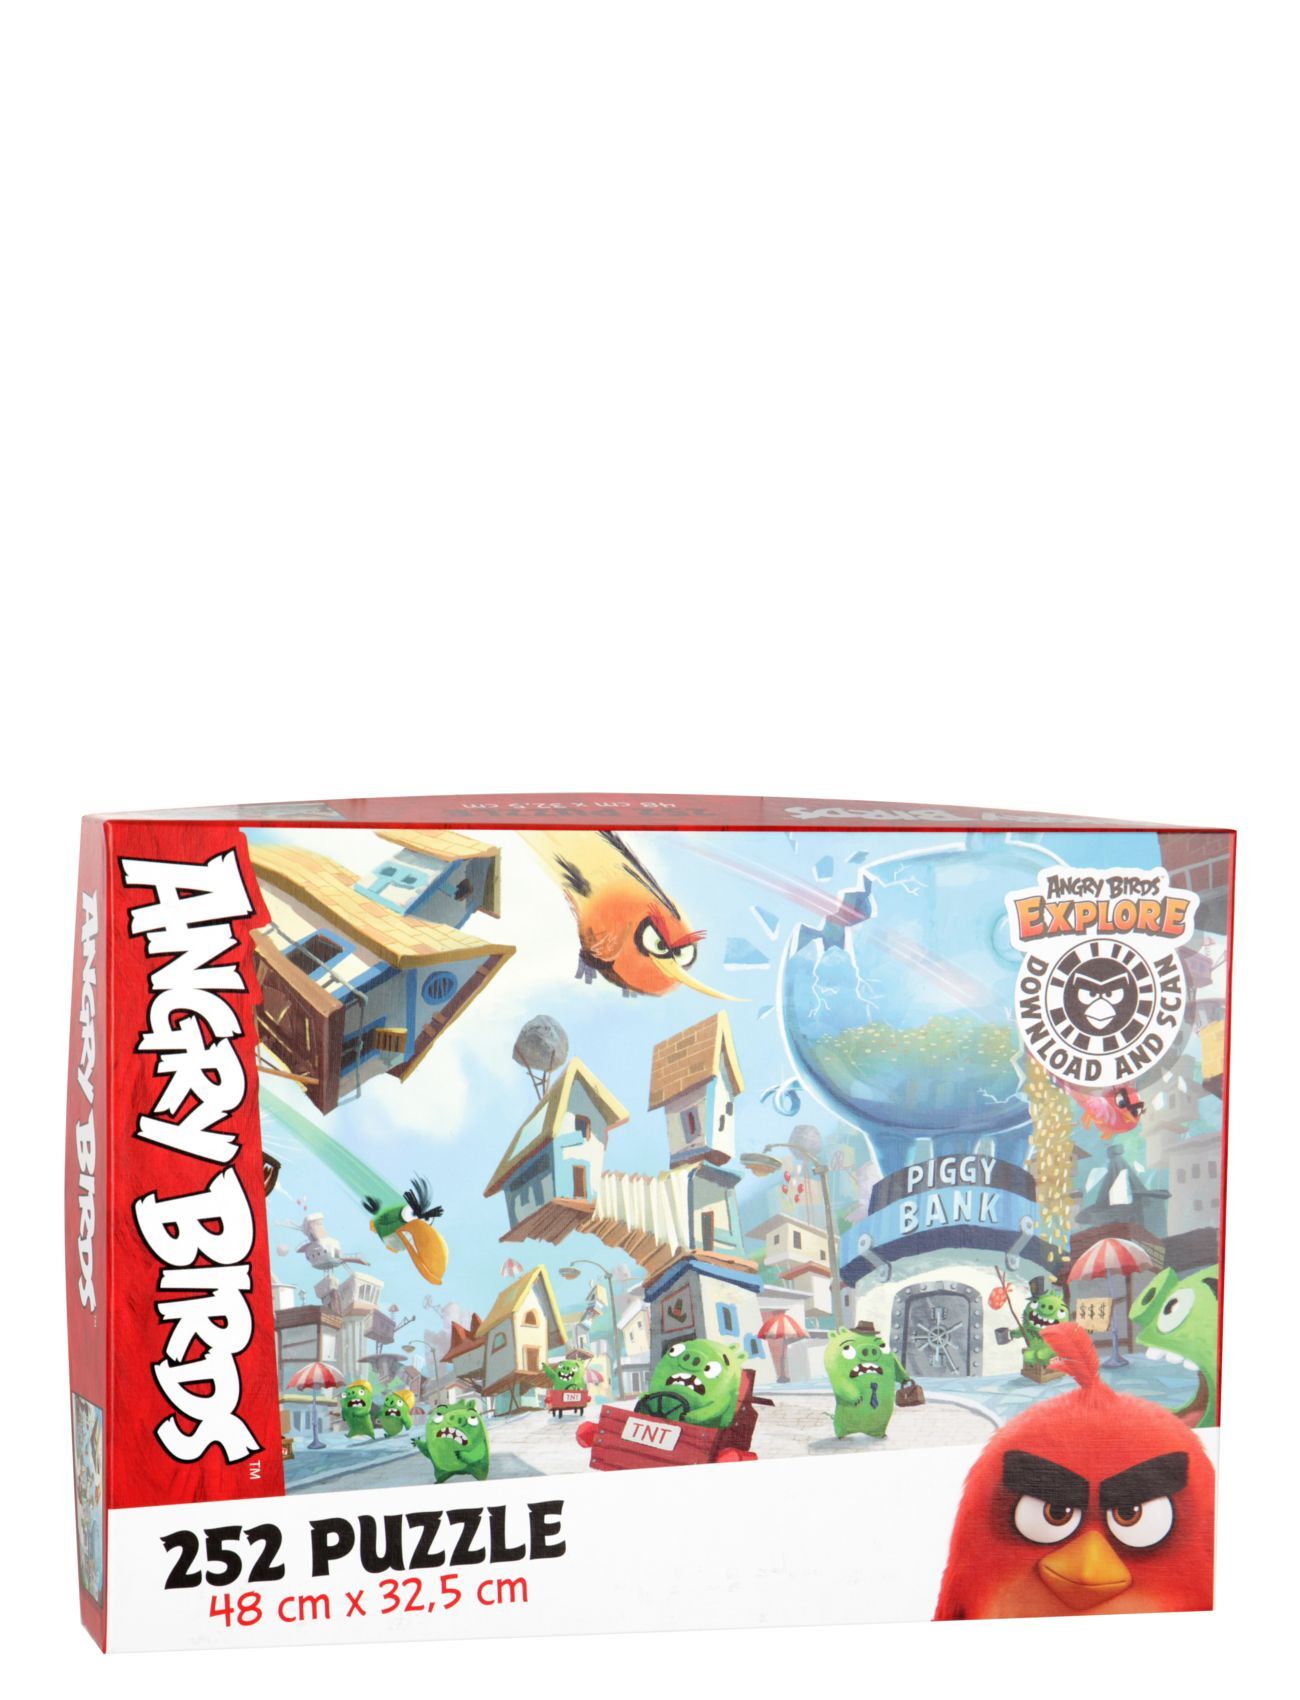 Martinex Angry Birds Puzzle 252 Pieces Toys Puzzles And Games Puzzles Multi/mønstret Martinex